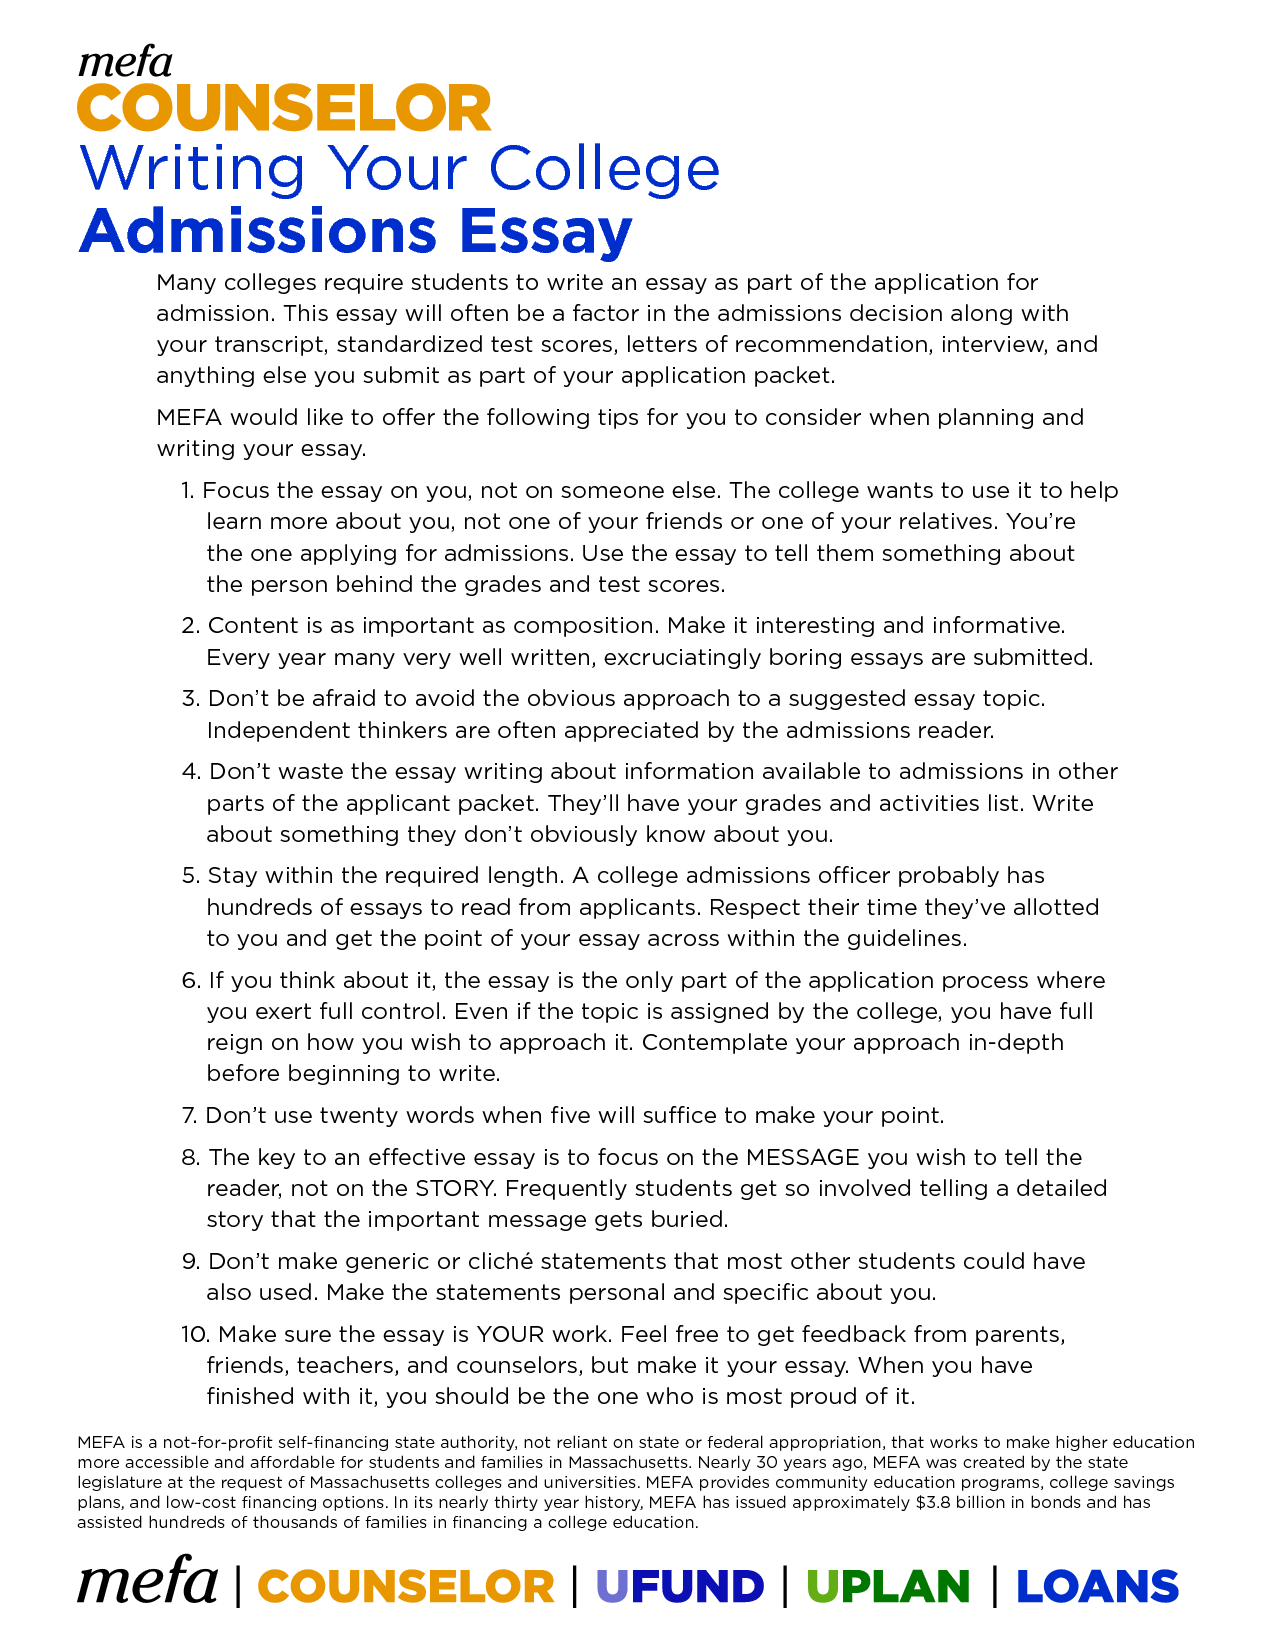 Essay writing service college admission 101